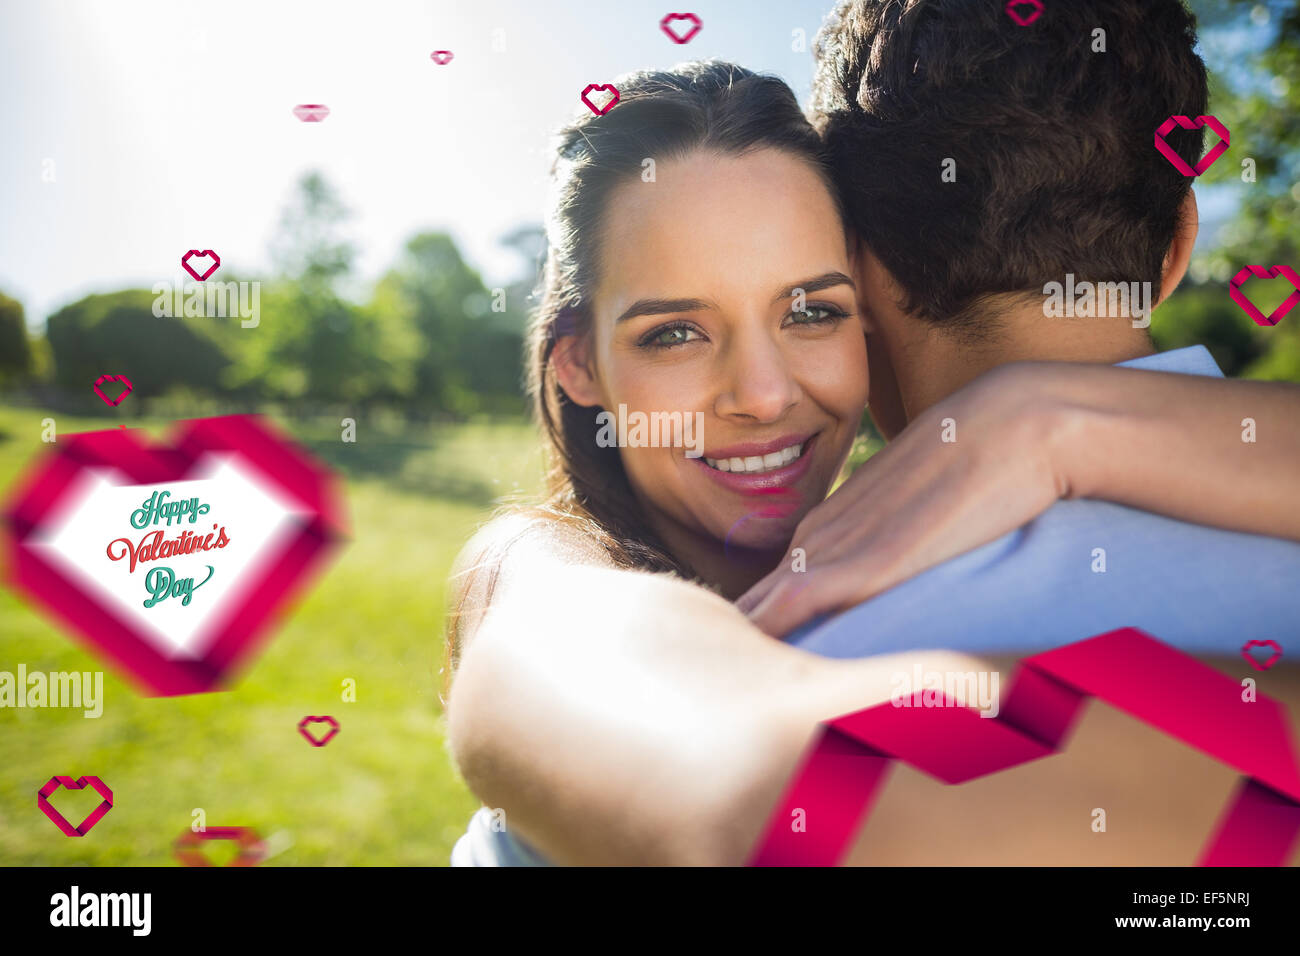 Composite image of loving and happy woman embracing man at park Stock Photo